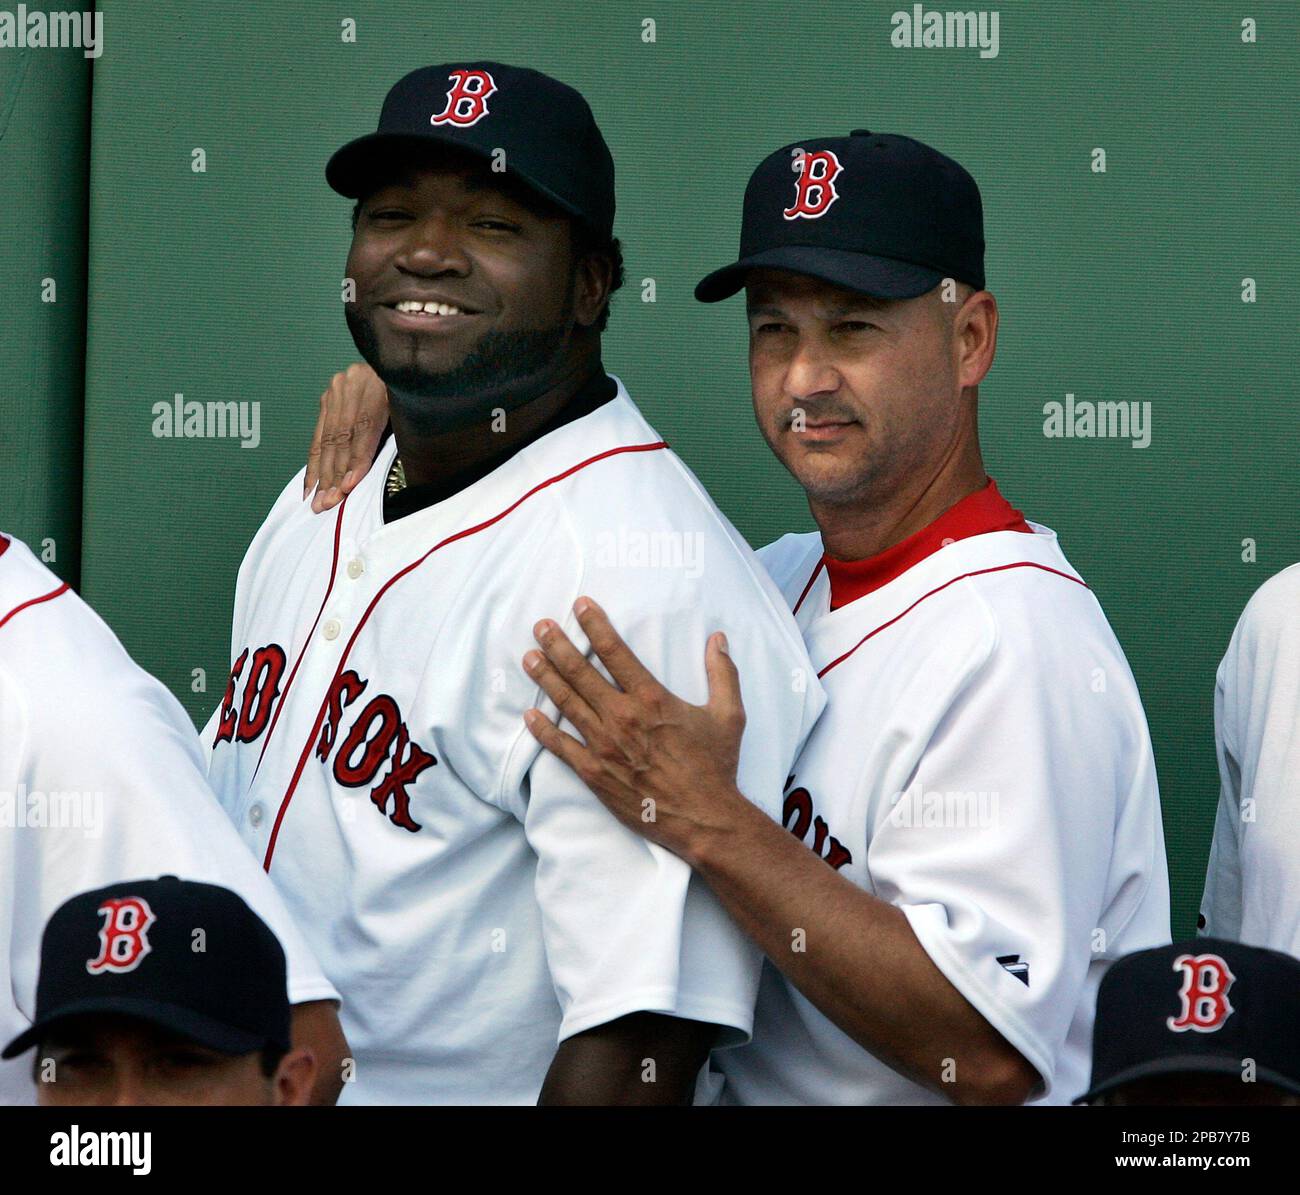 Boston Red Sox manager Terry Francona, right, kids around with David Ortiz  as they wait to take a team photo prior to their baseball game against the  Tampa Bay Devil Rays at